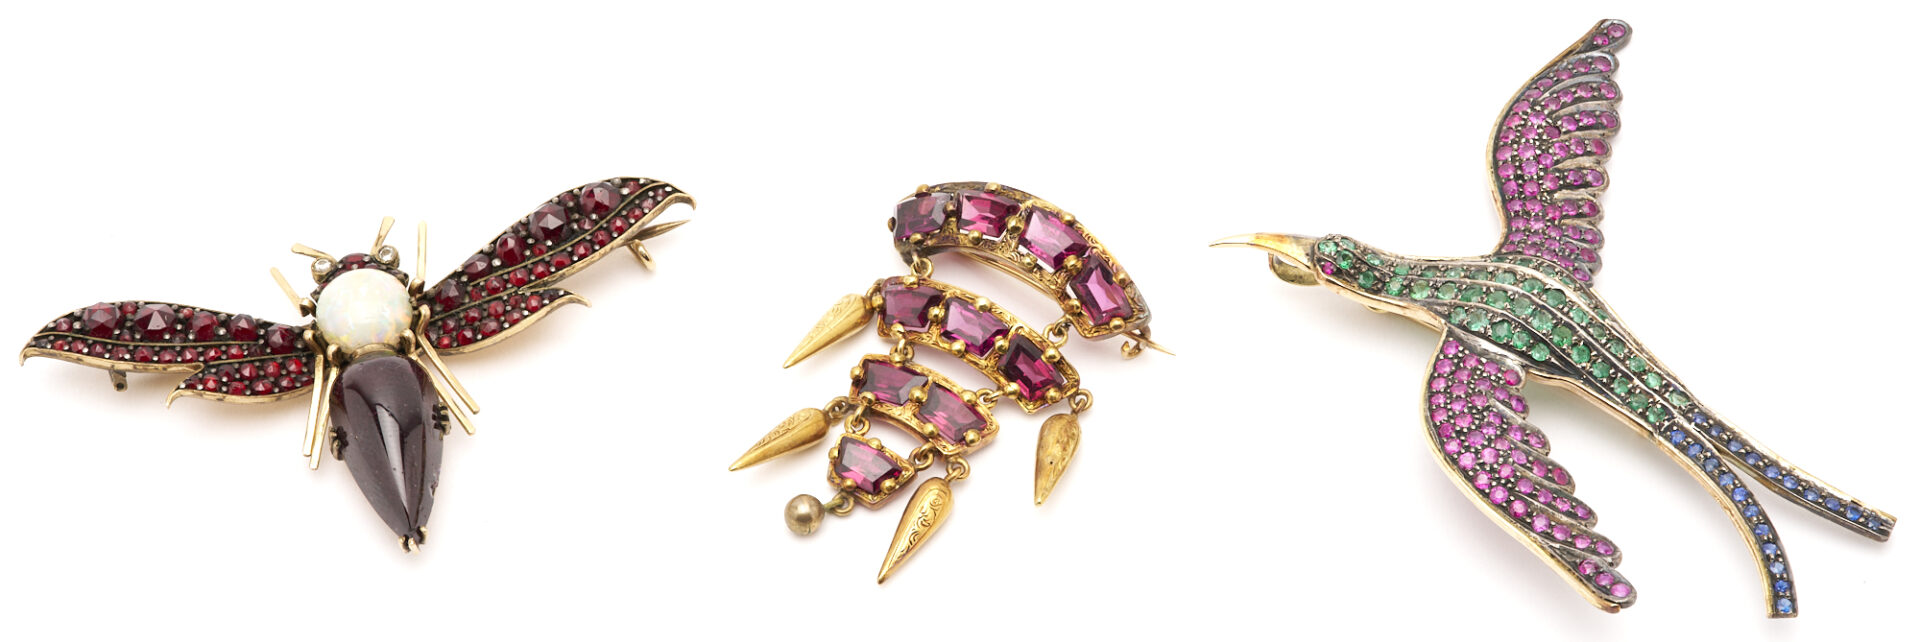 Lot 690: 3 Precious Metal & Gemstone Brooches, incl. Insect